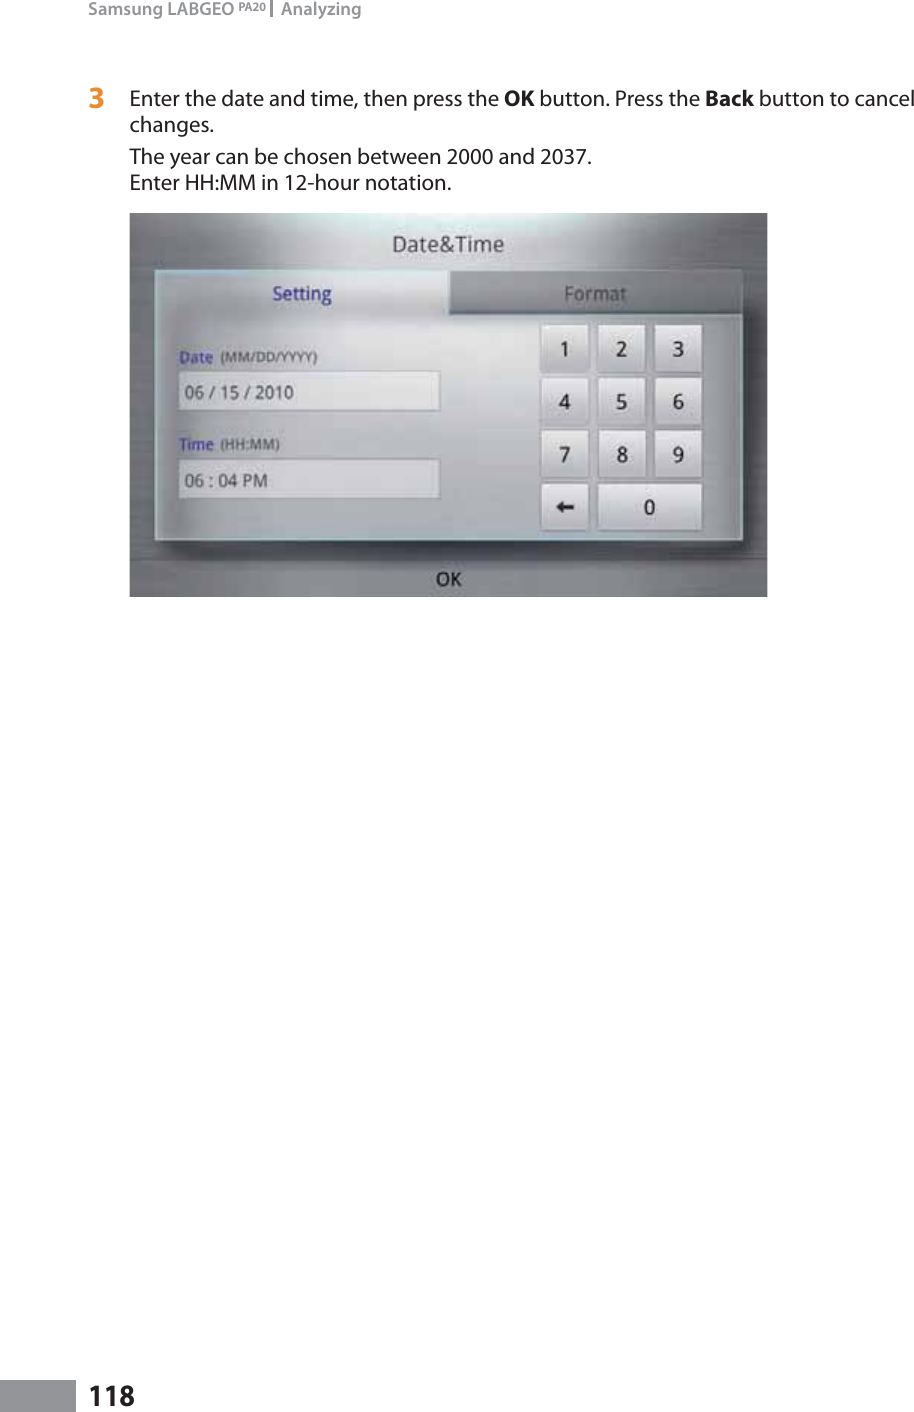 118Samsung LABGEO PA20   Analyzing3  Enter the date and time, then press the OK button. Press the Back button to cancel changes.The year can be chosen between 2000 and 2037. Enter HH:MM in 12-hour notation.